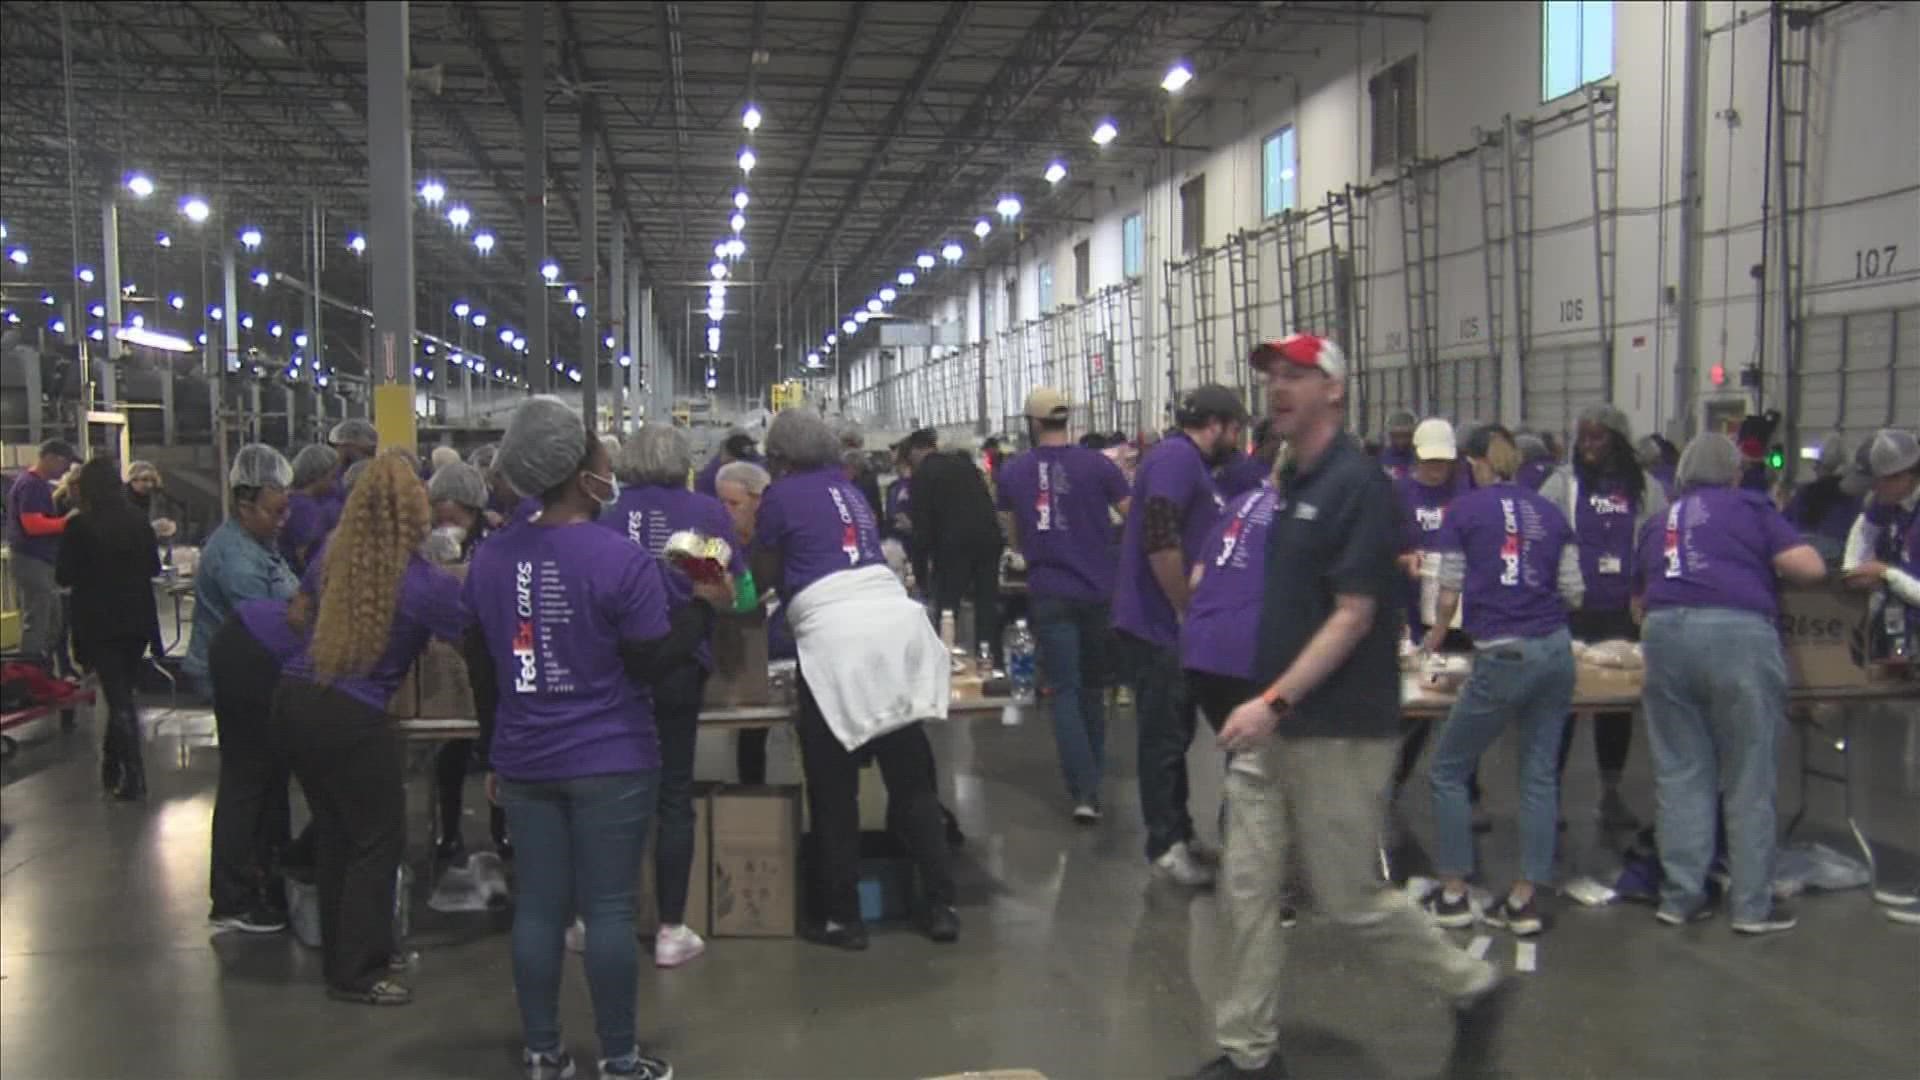 Memphis was one of 9 FedEx cities to take part in the day of service. Combined, the locations made 170,000 meals.